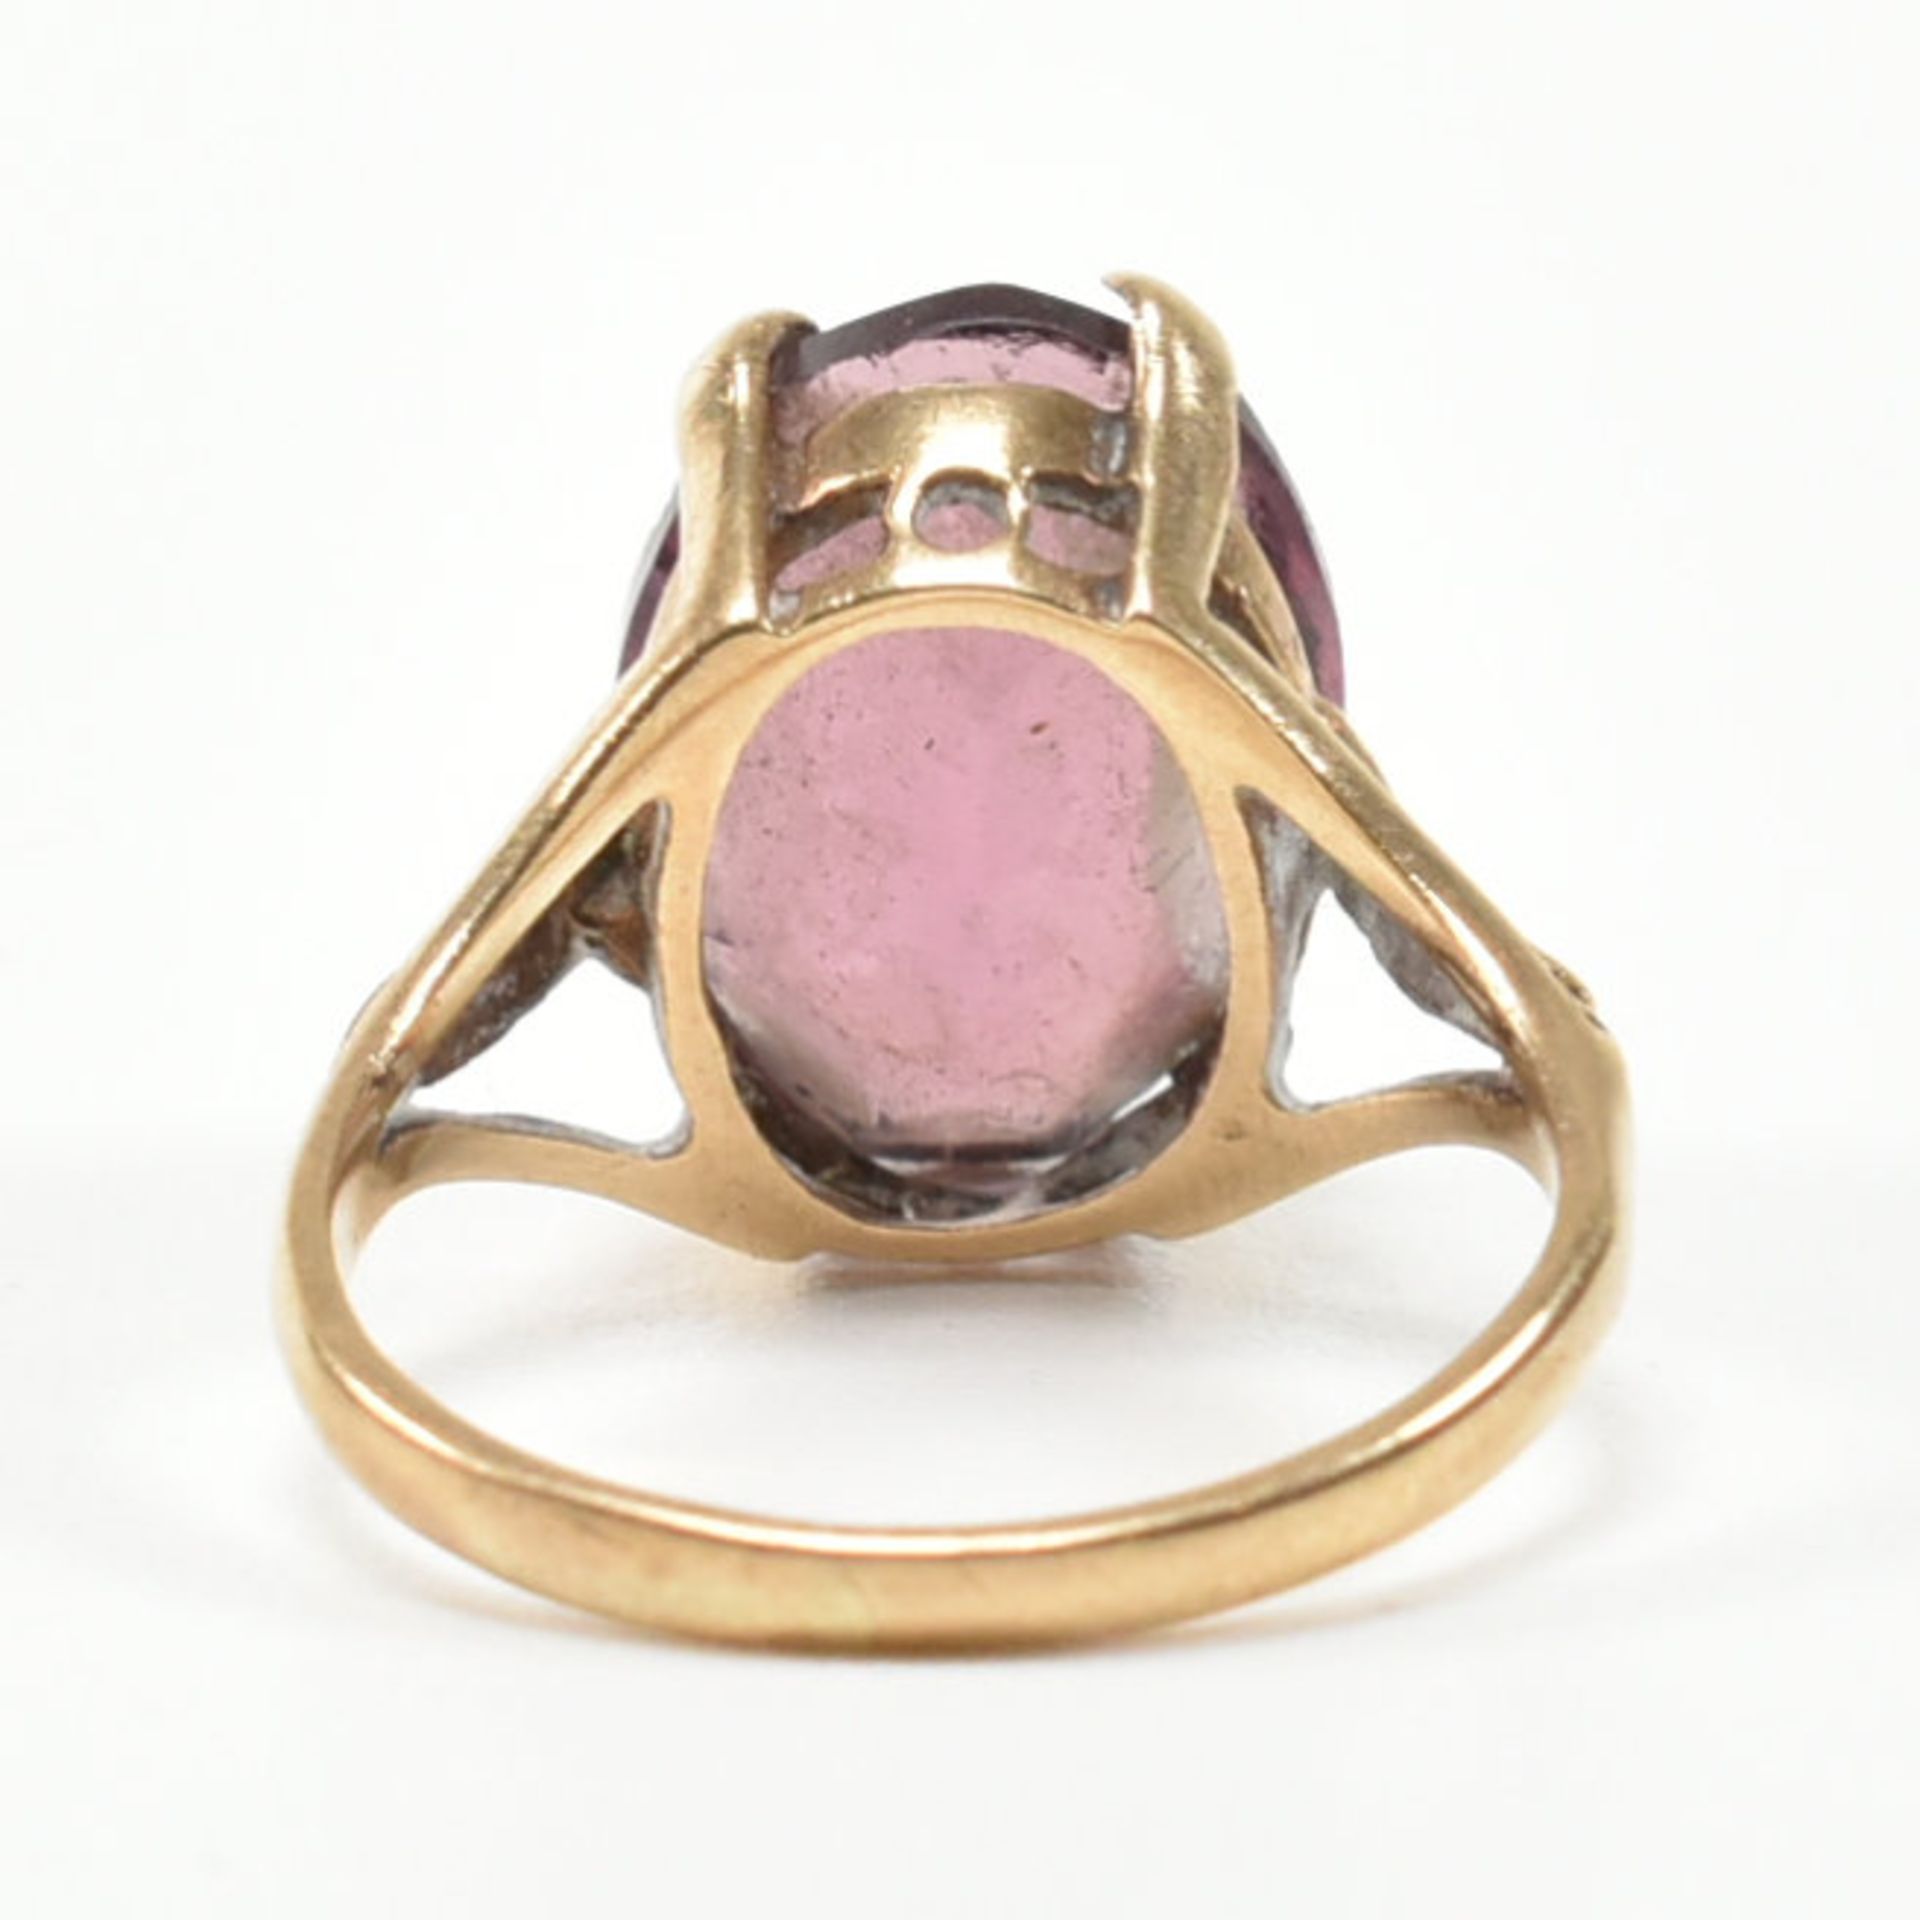 VINTAGE 9CT GOLD & PURPLE STONE RING - Image 5 of 9